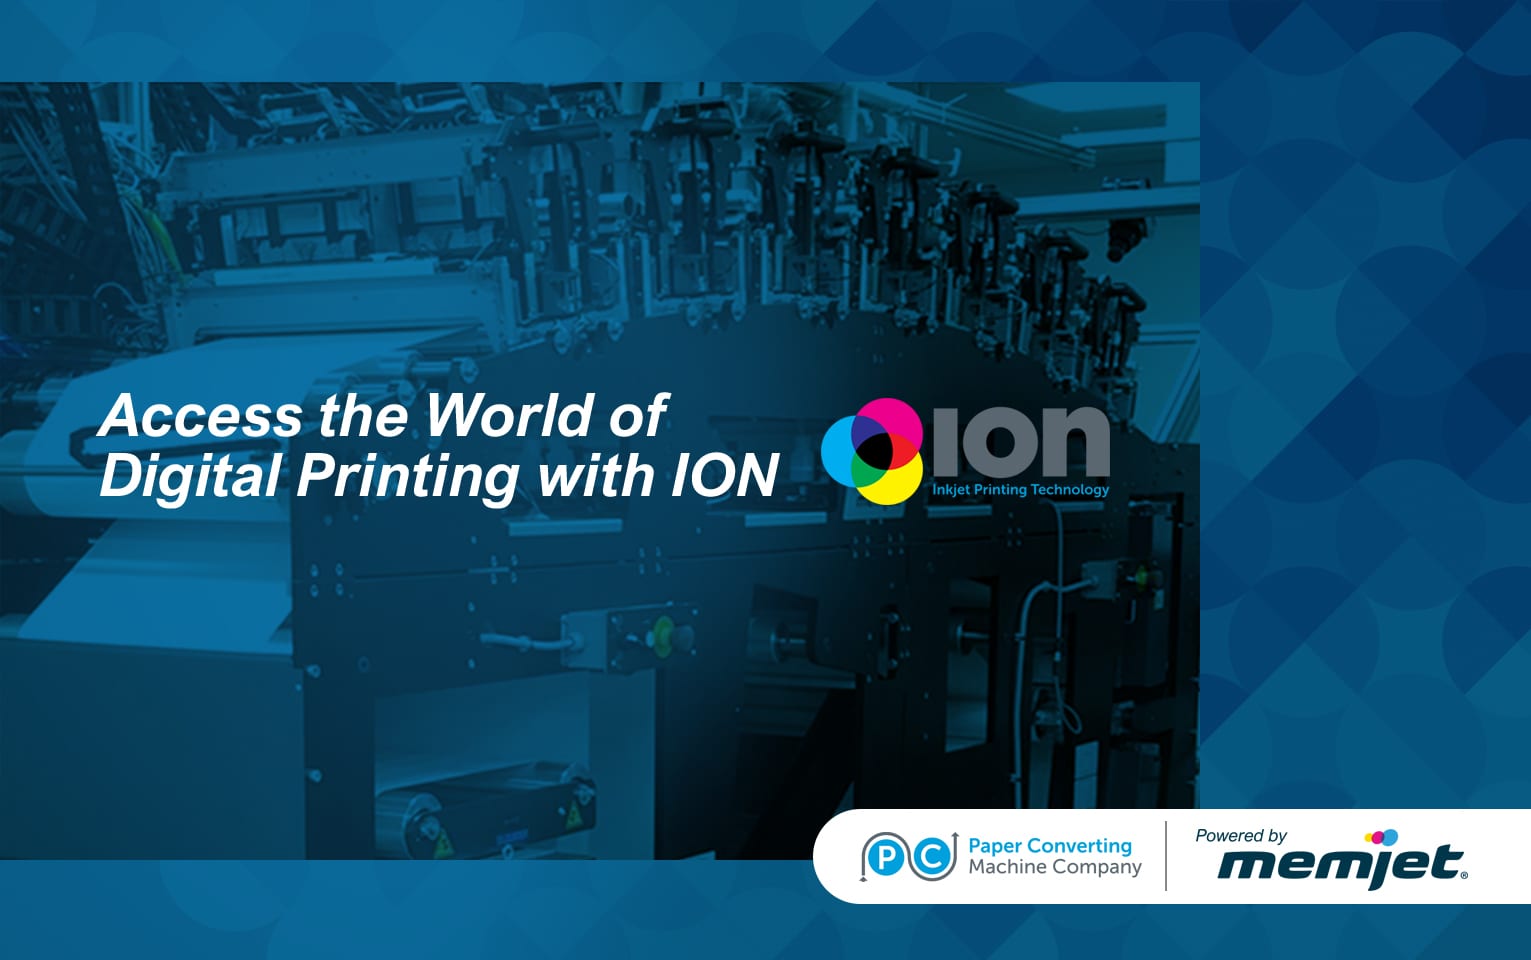 Access the World of Digital Printing with ION